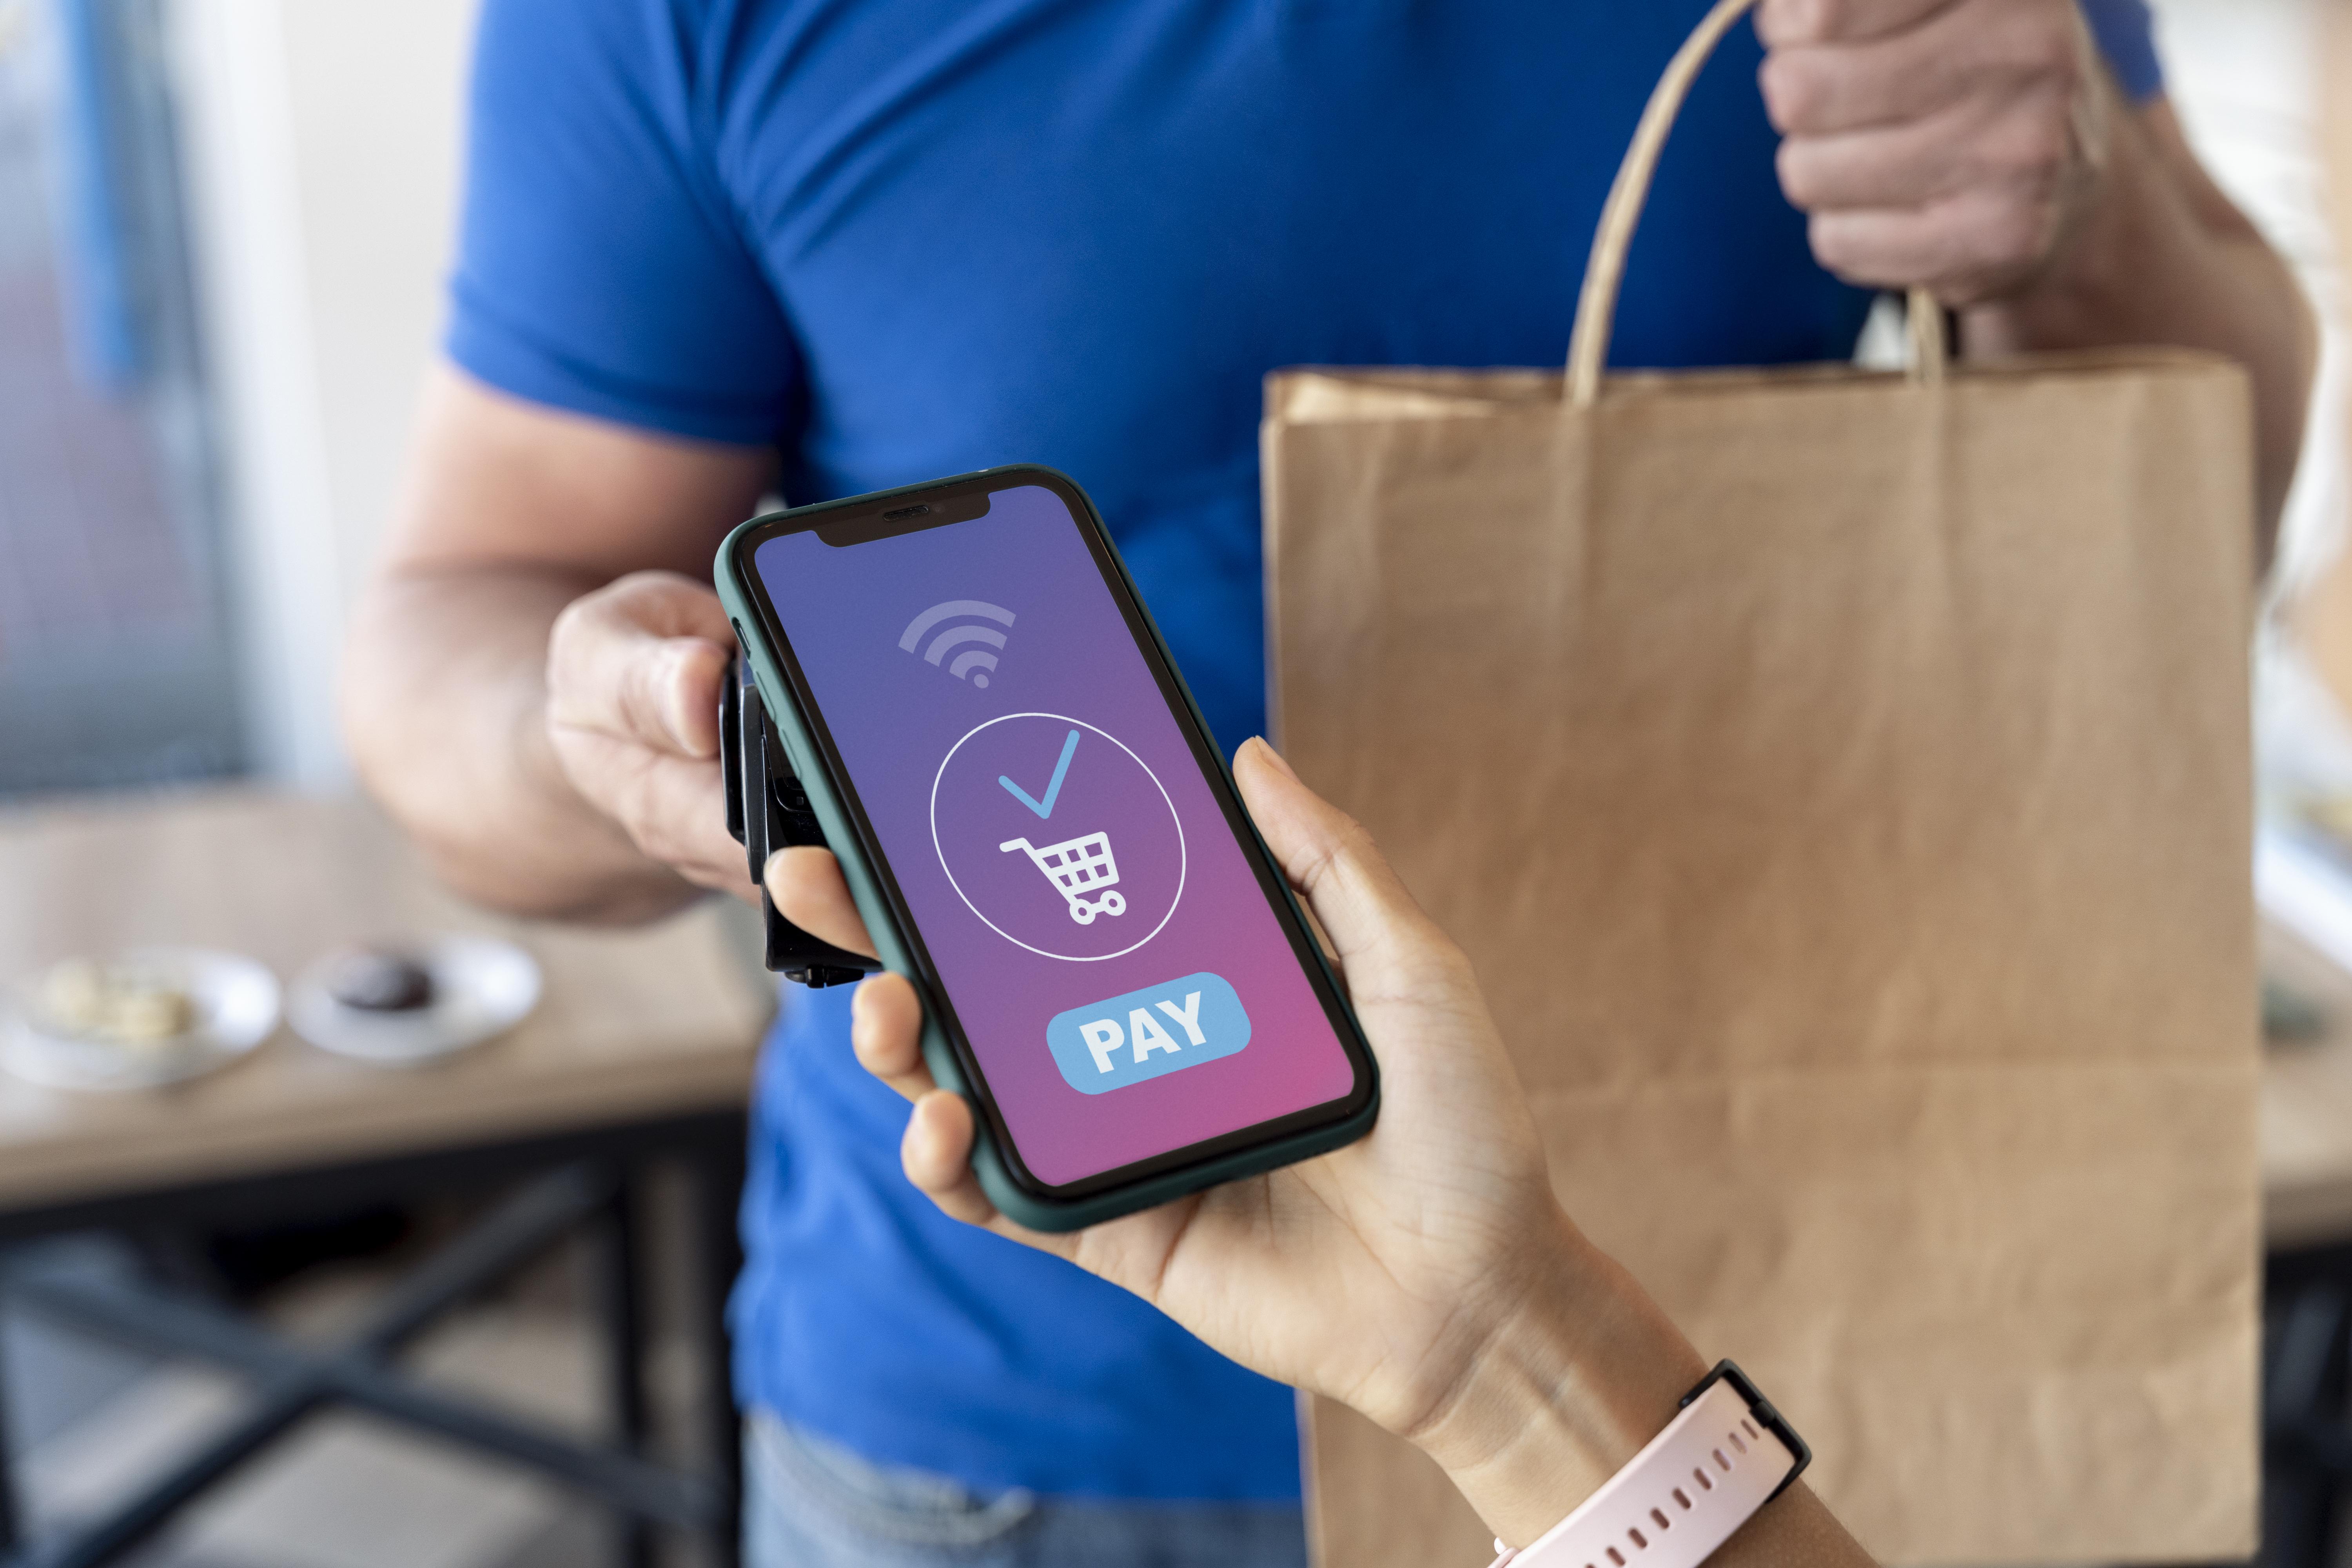 Paytm launches bill payment app in Canada; mobile payment transaction value expected to reach US$ 98.1 billion by 2021